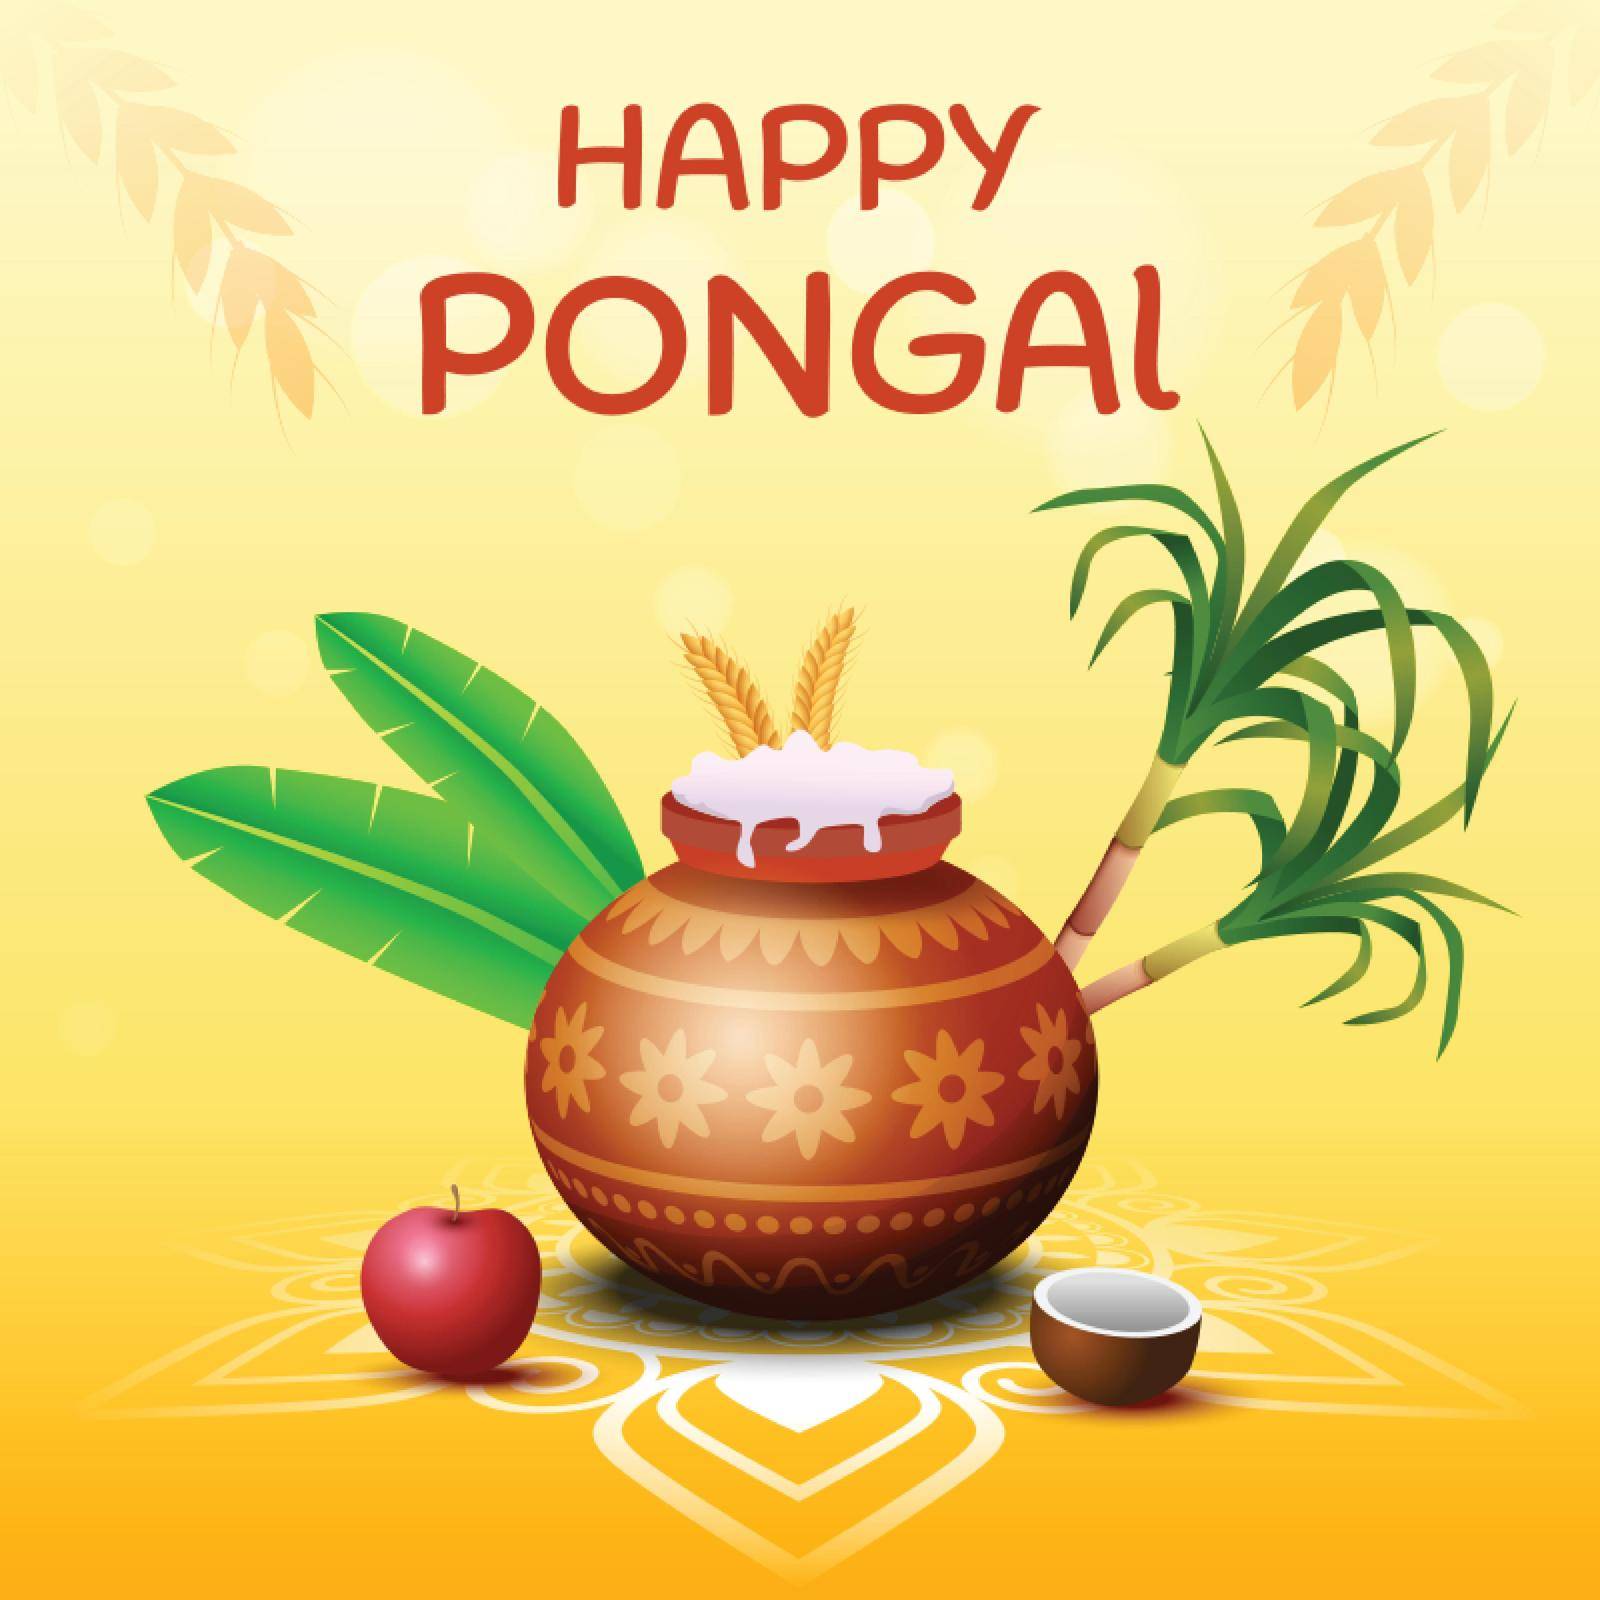 Happy Pongal Holiday Festival Celebration by kritvector